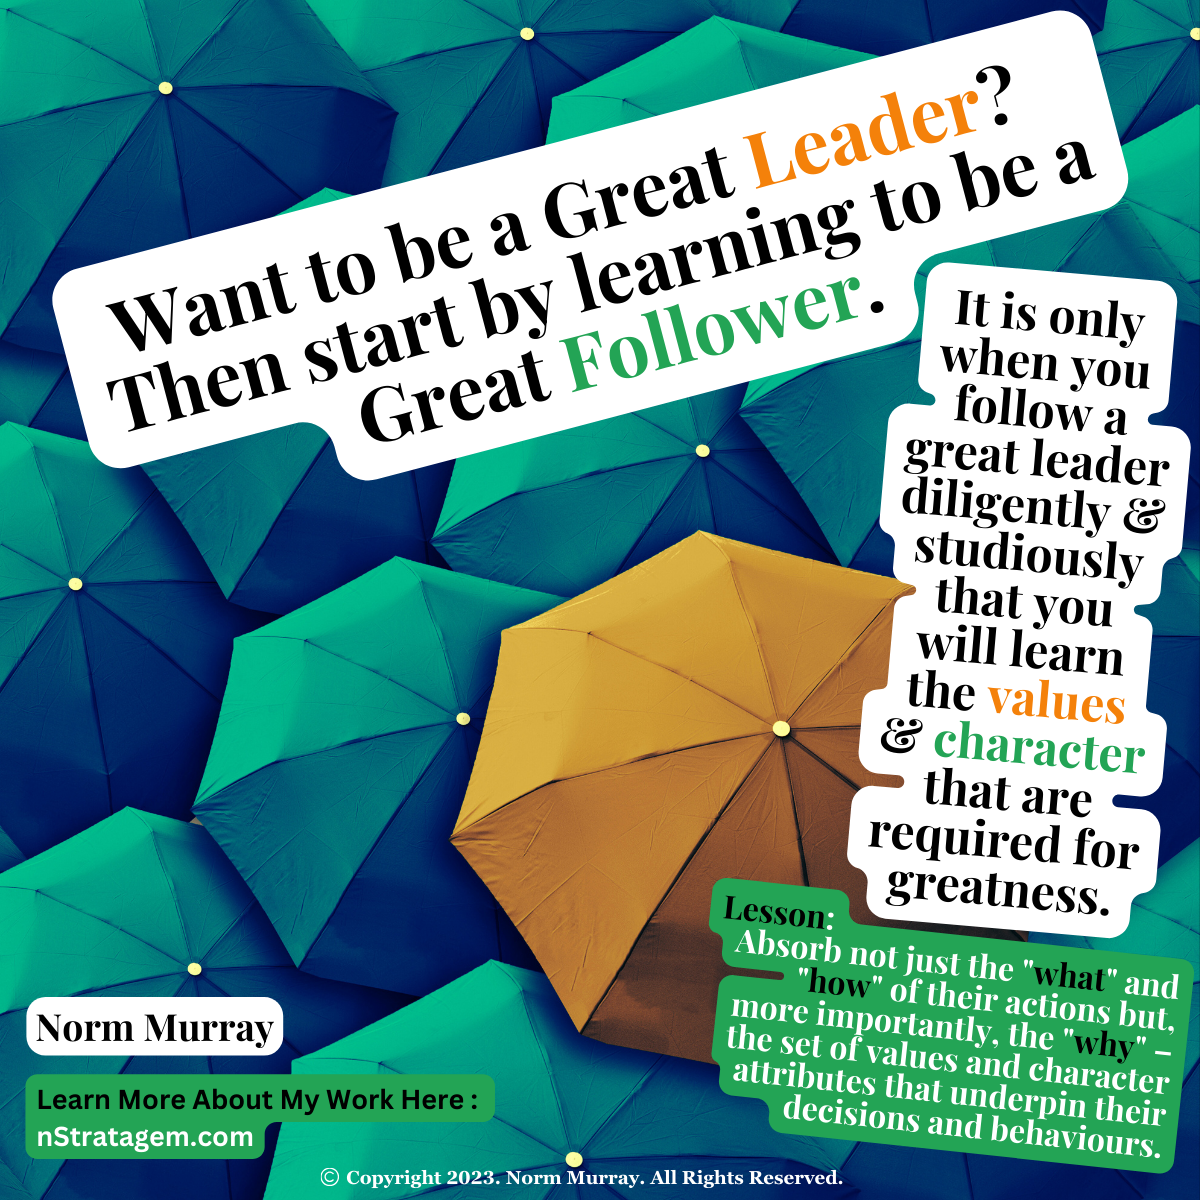 Read more about the article Want to be a Great Leader? Then start by learning to be a Great Follower.